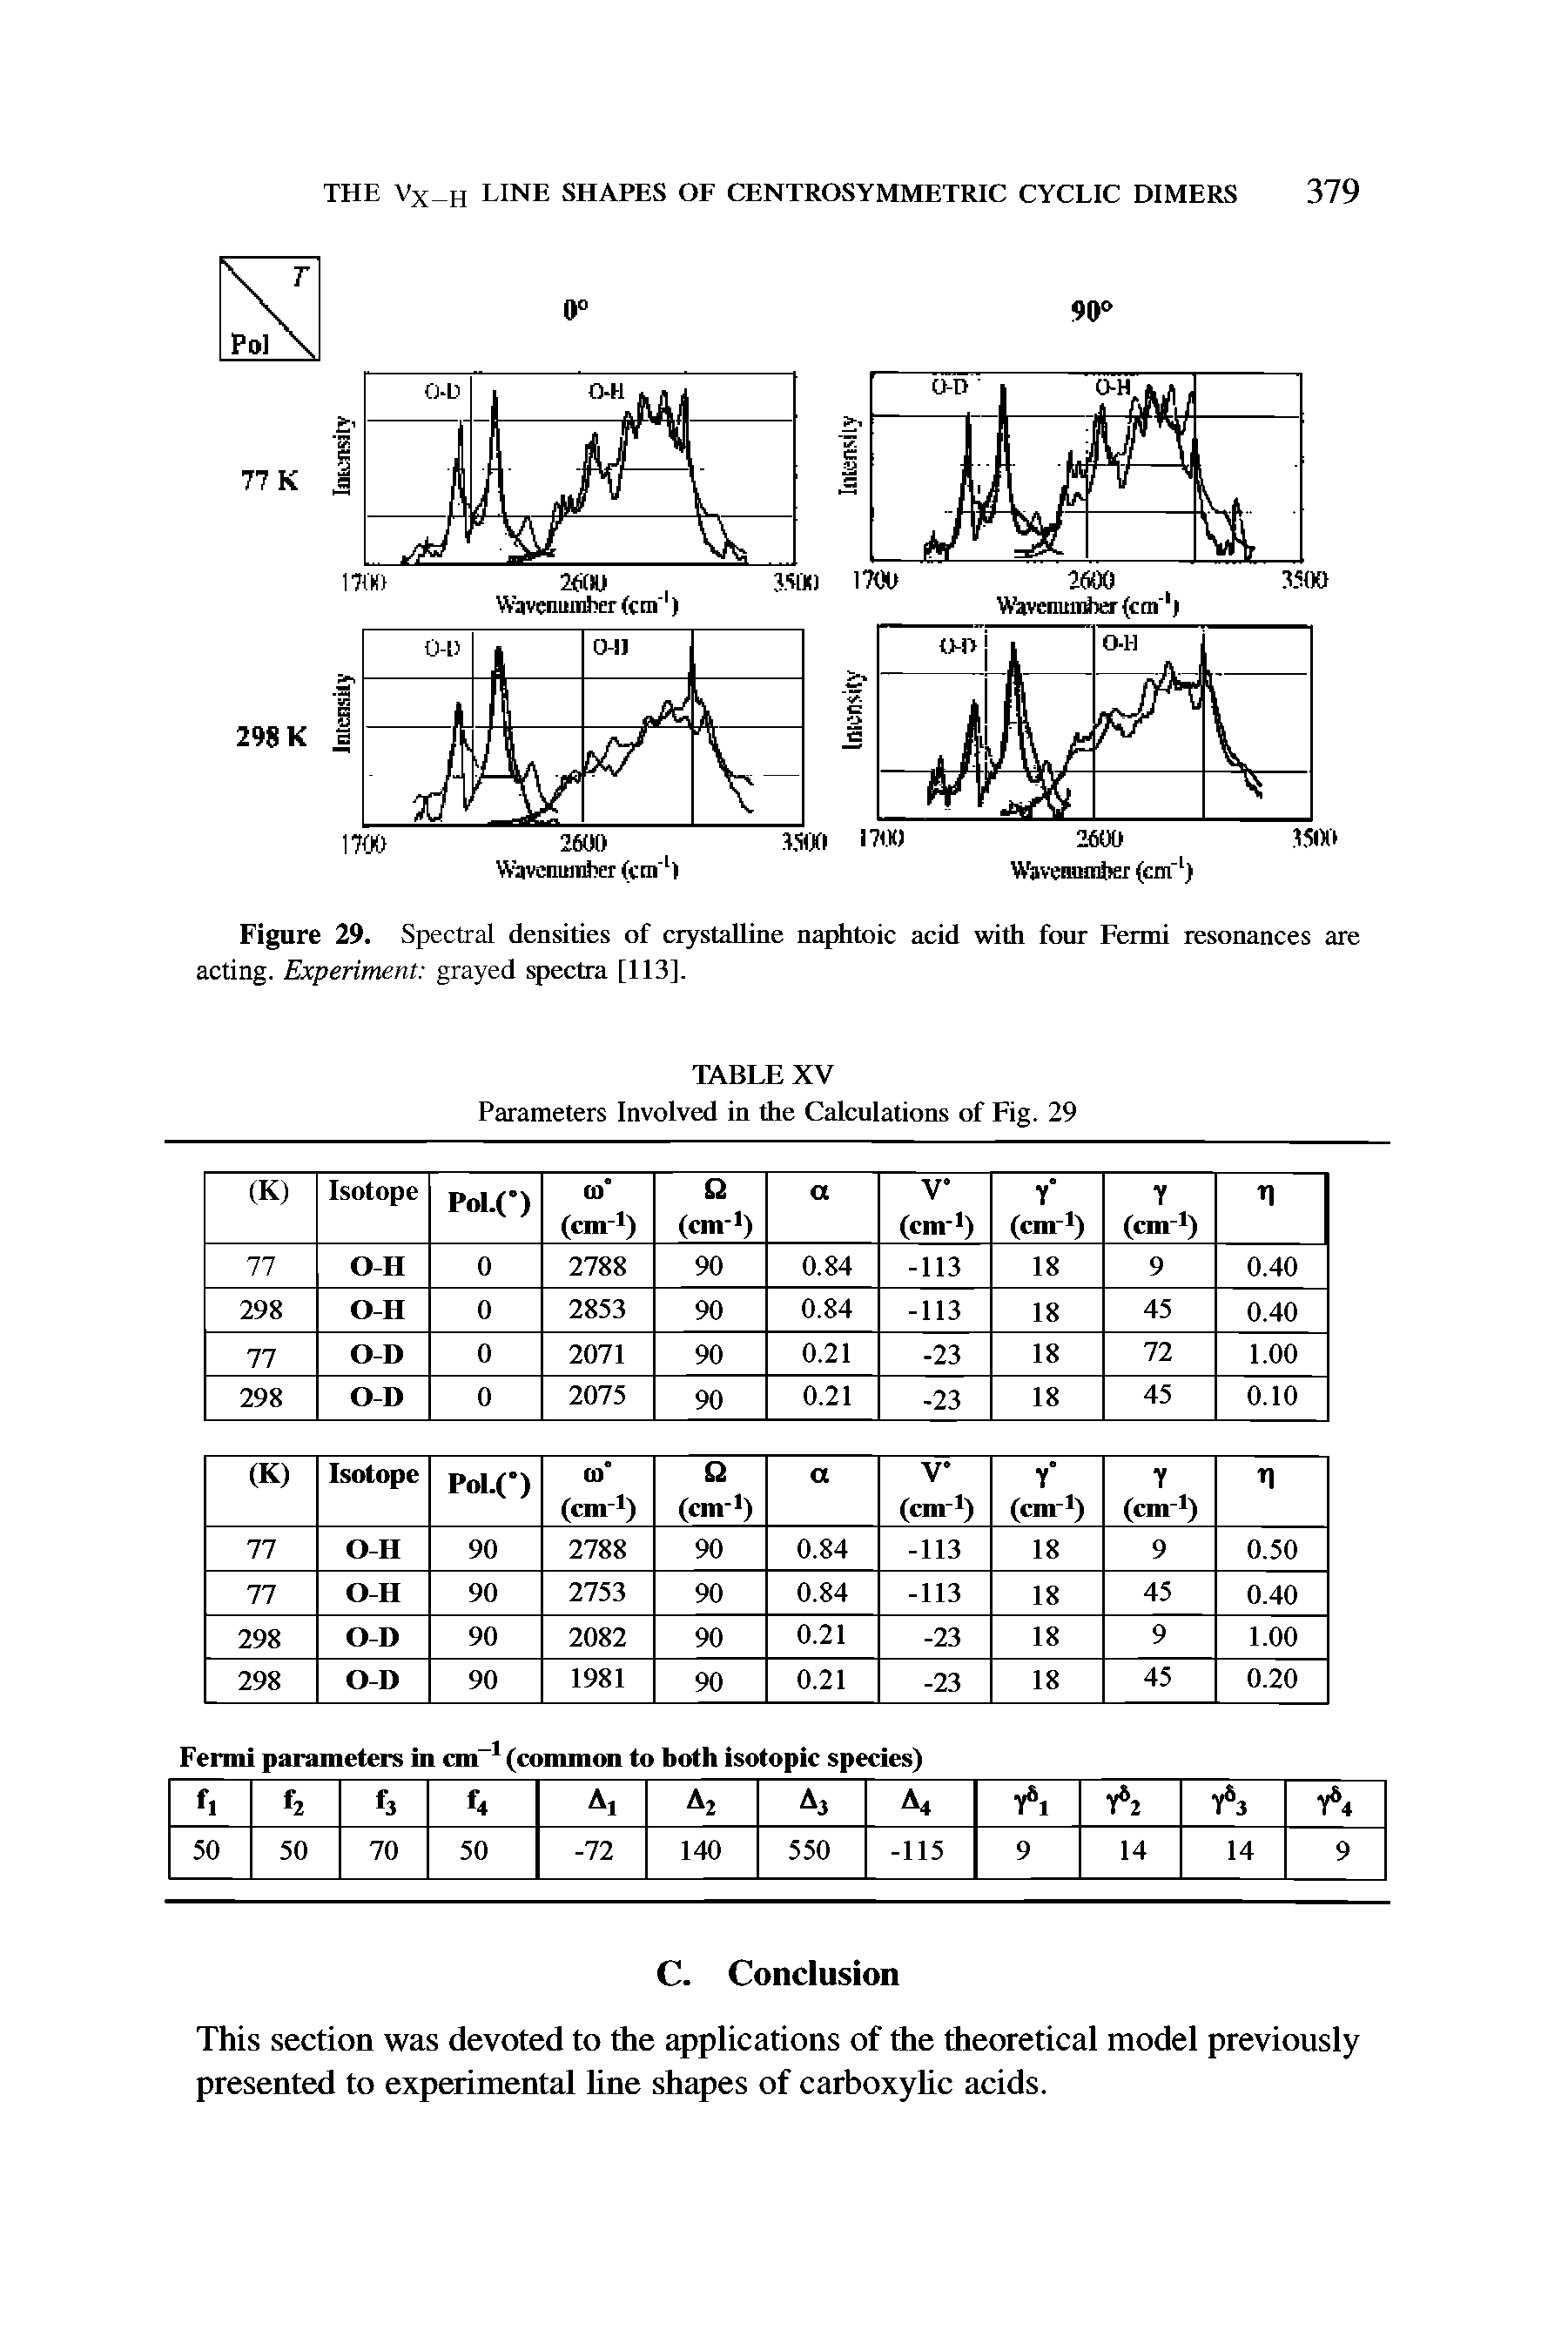 Figure 29. Spectral densities of crystalline naphtoic acid with four Fermi resonances are acting. Experiment grayed spectra [113].